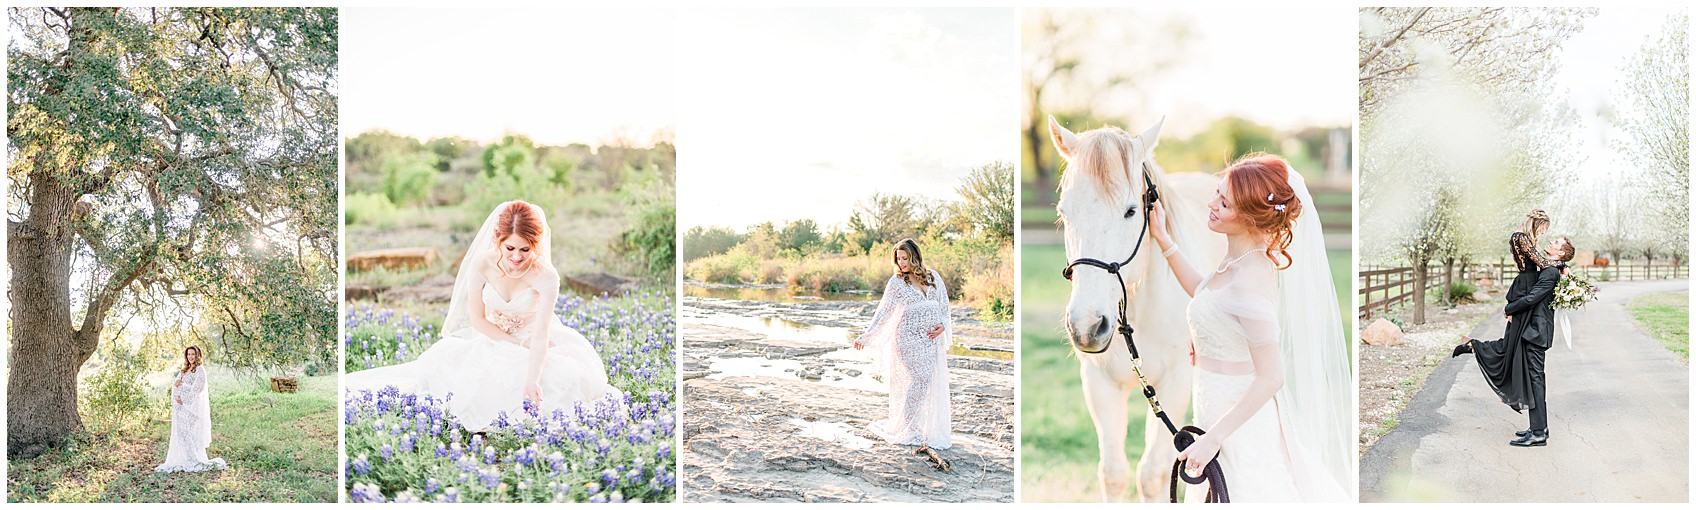 locations for elopements and micro intimate weddings in the texas hill country by allison jeffers photography 0007